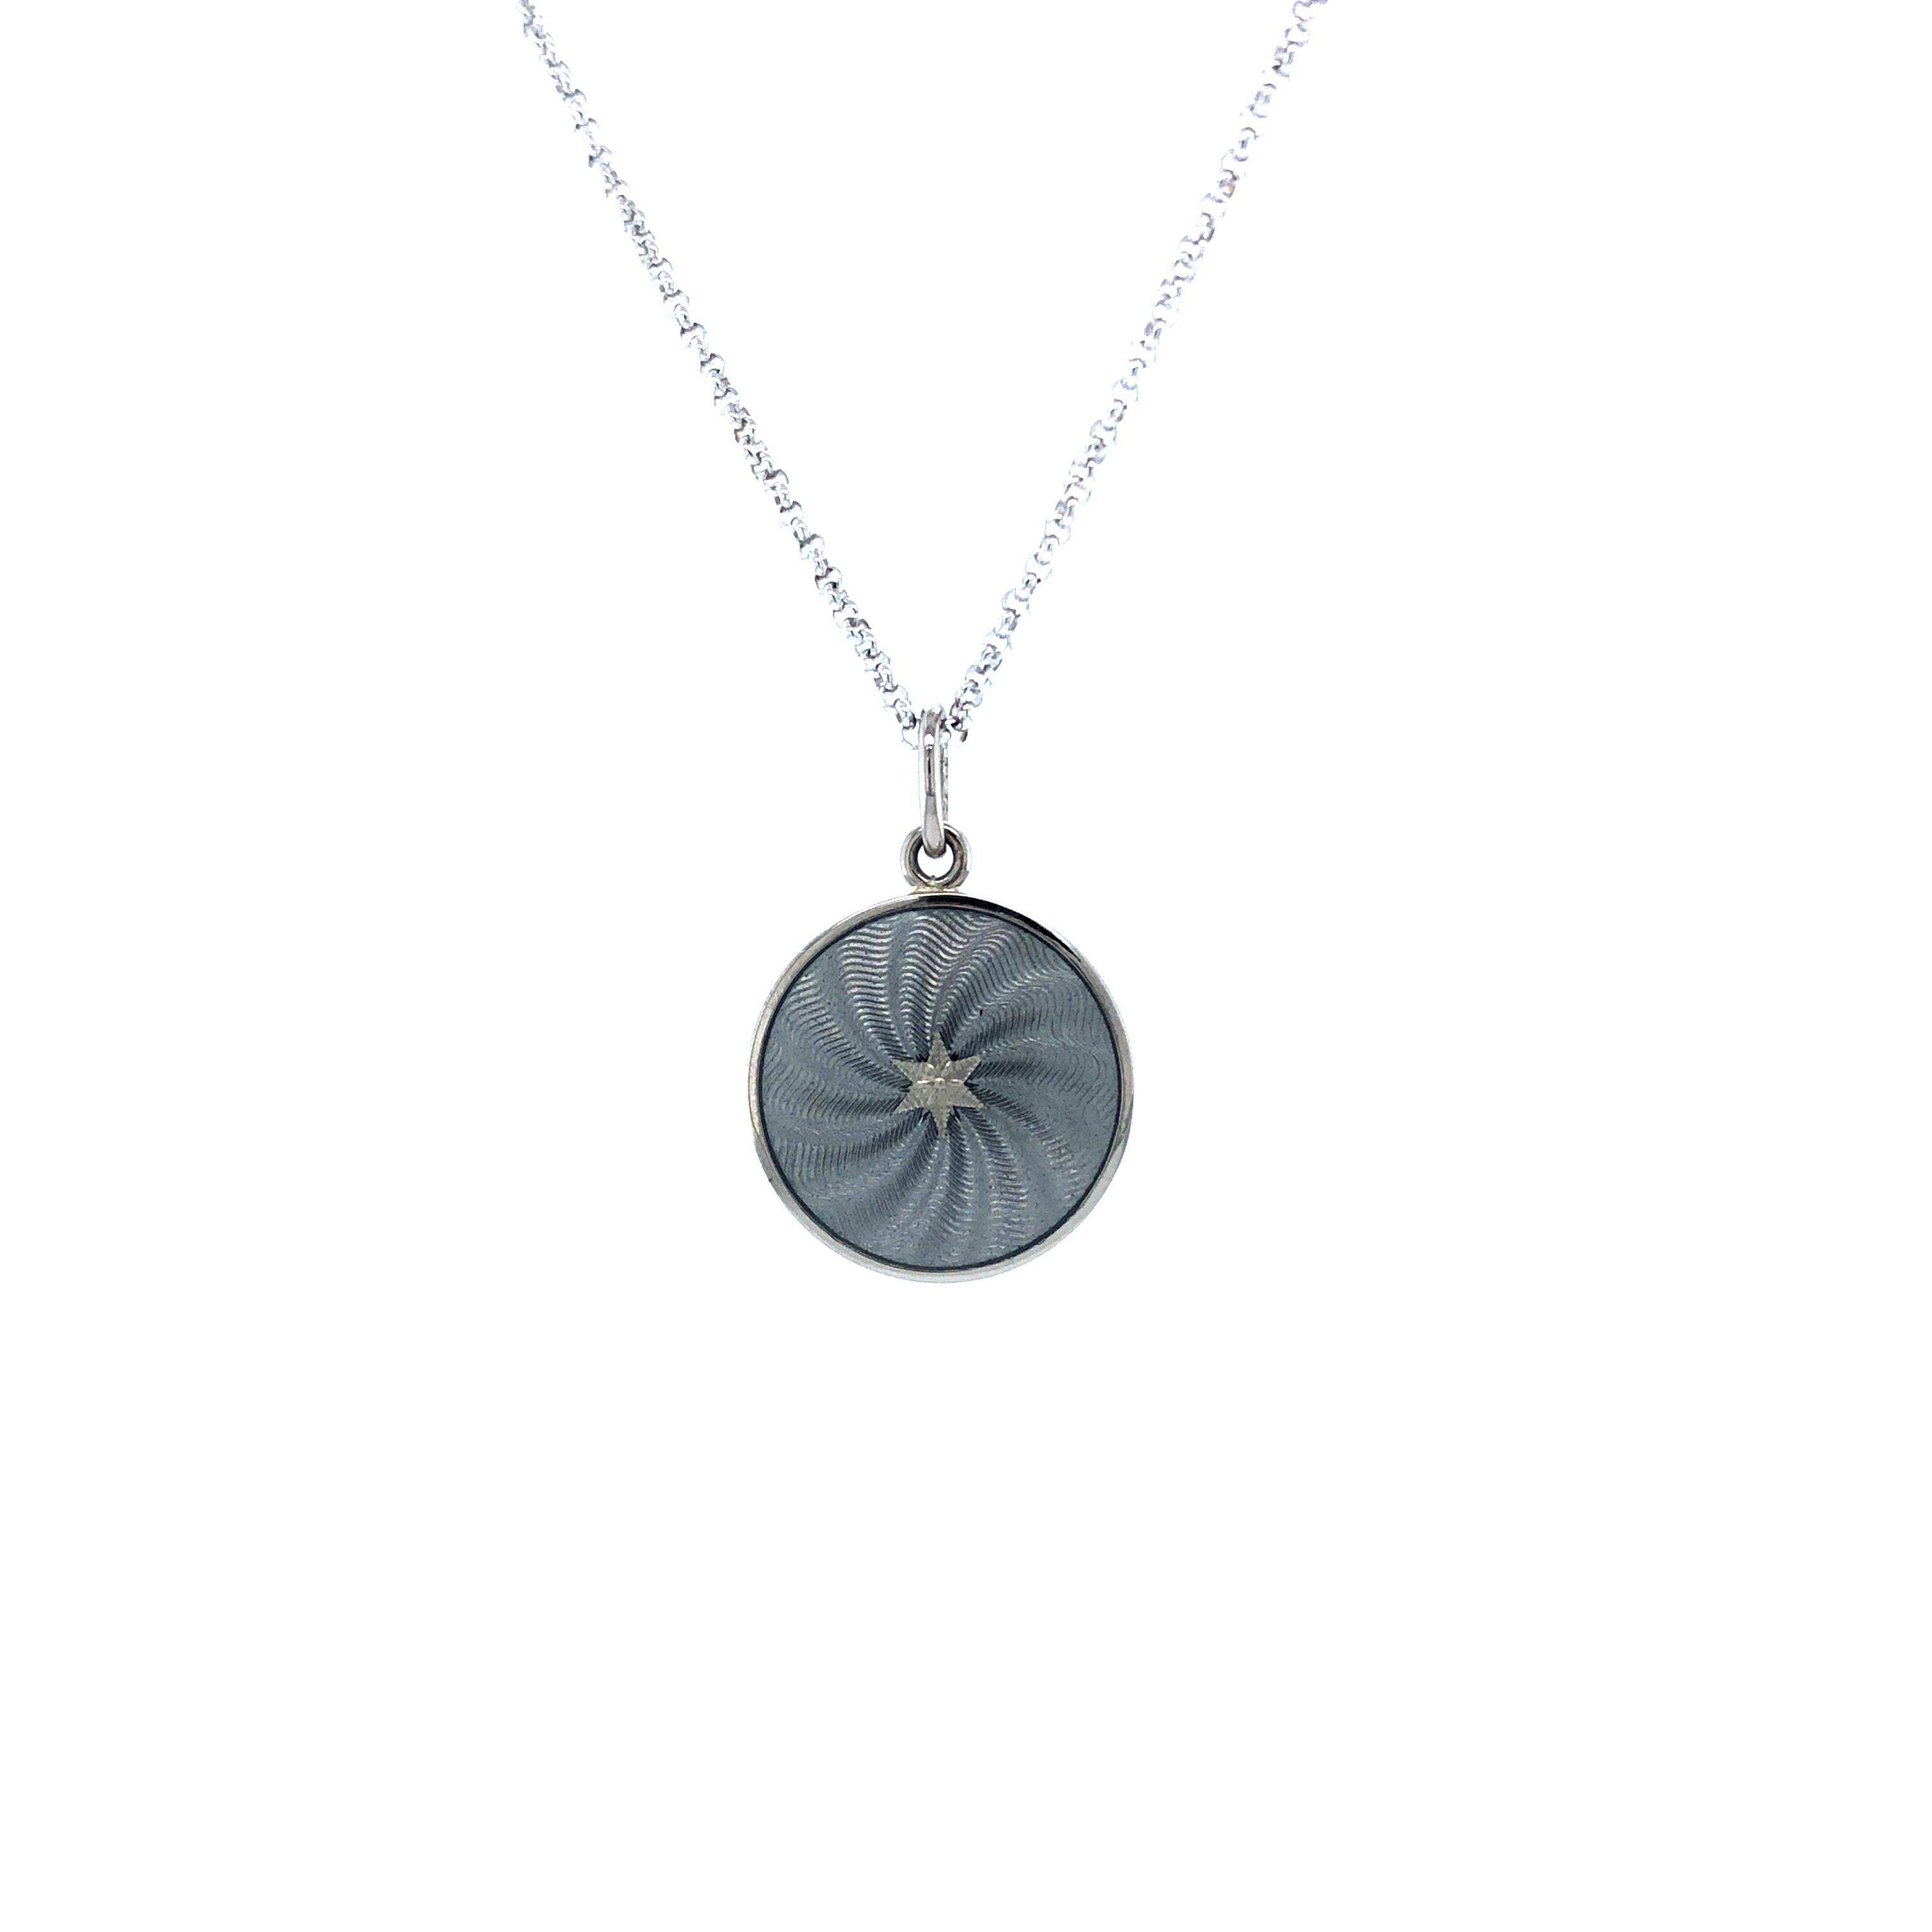 Round disk pendant necklace 18k white gold, Diskos Collection, translucent silver vitreous enamel, guilloche, gold paillons, diameter app. 15.0 mm 

About the creator Victor Mayer
Victor Mayer is internationally renowned for elegant timeless designs